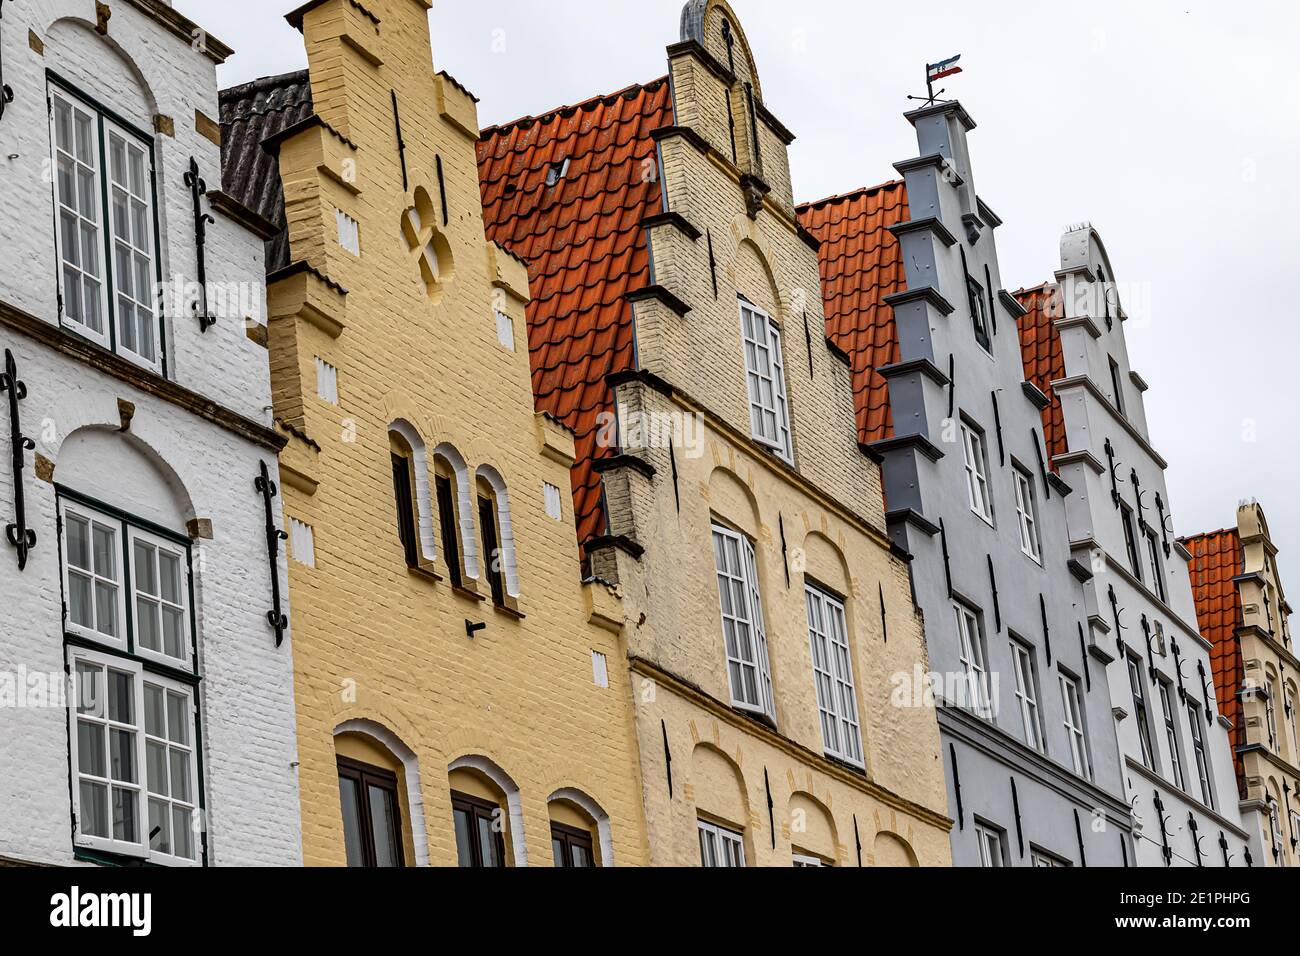 A row of historic gabled houses on the market square in Friedrichstadt, Schleswig-Holstein, Germany Stock Photo